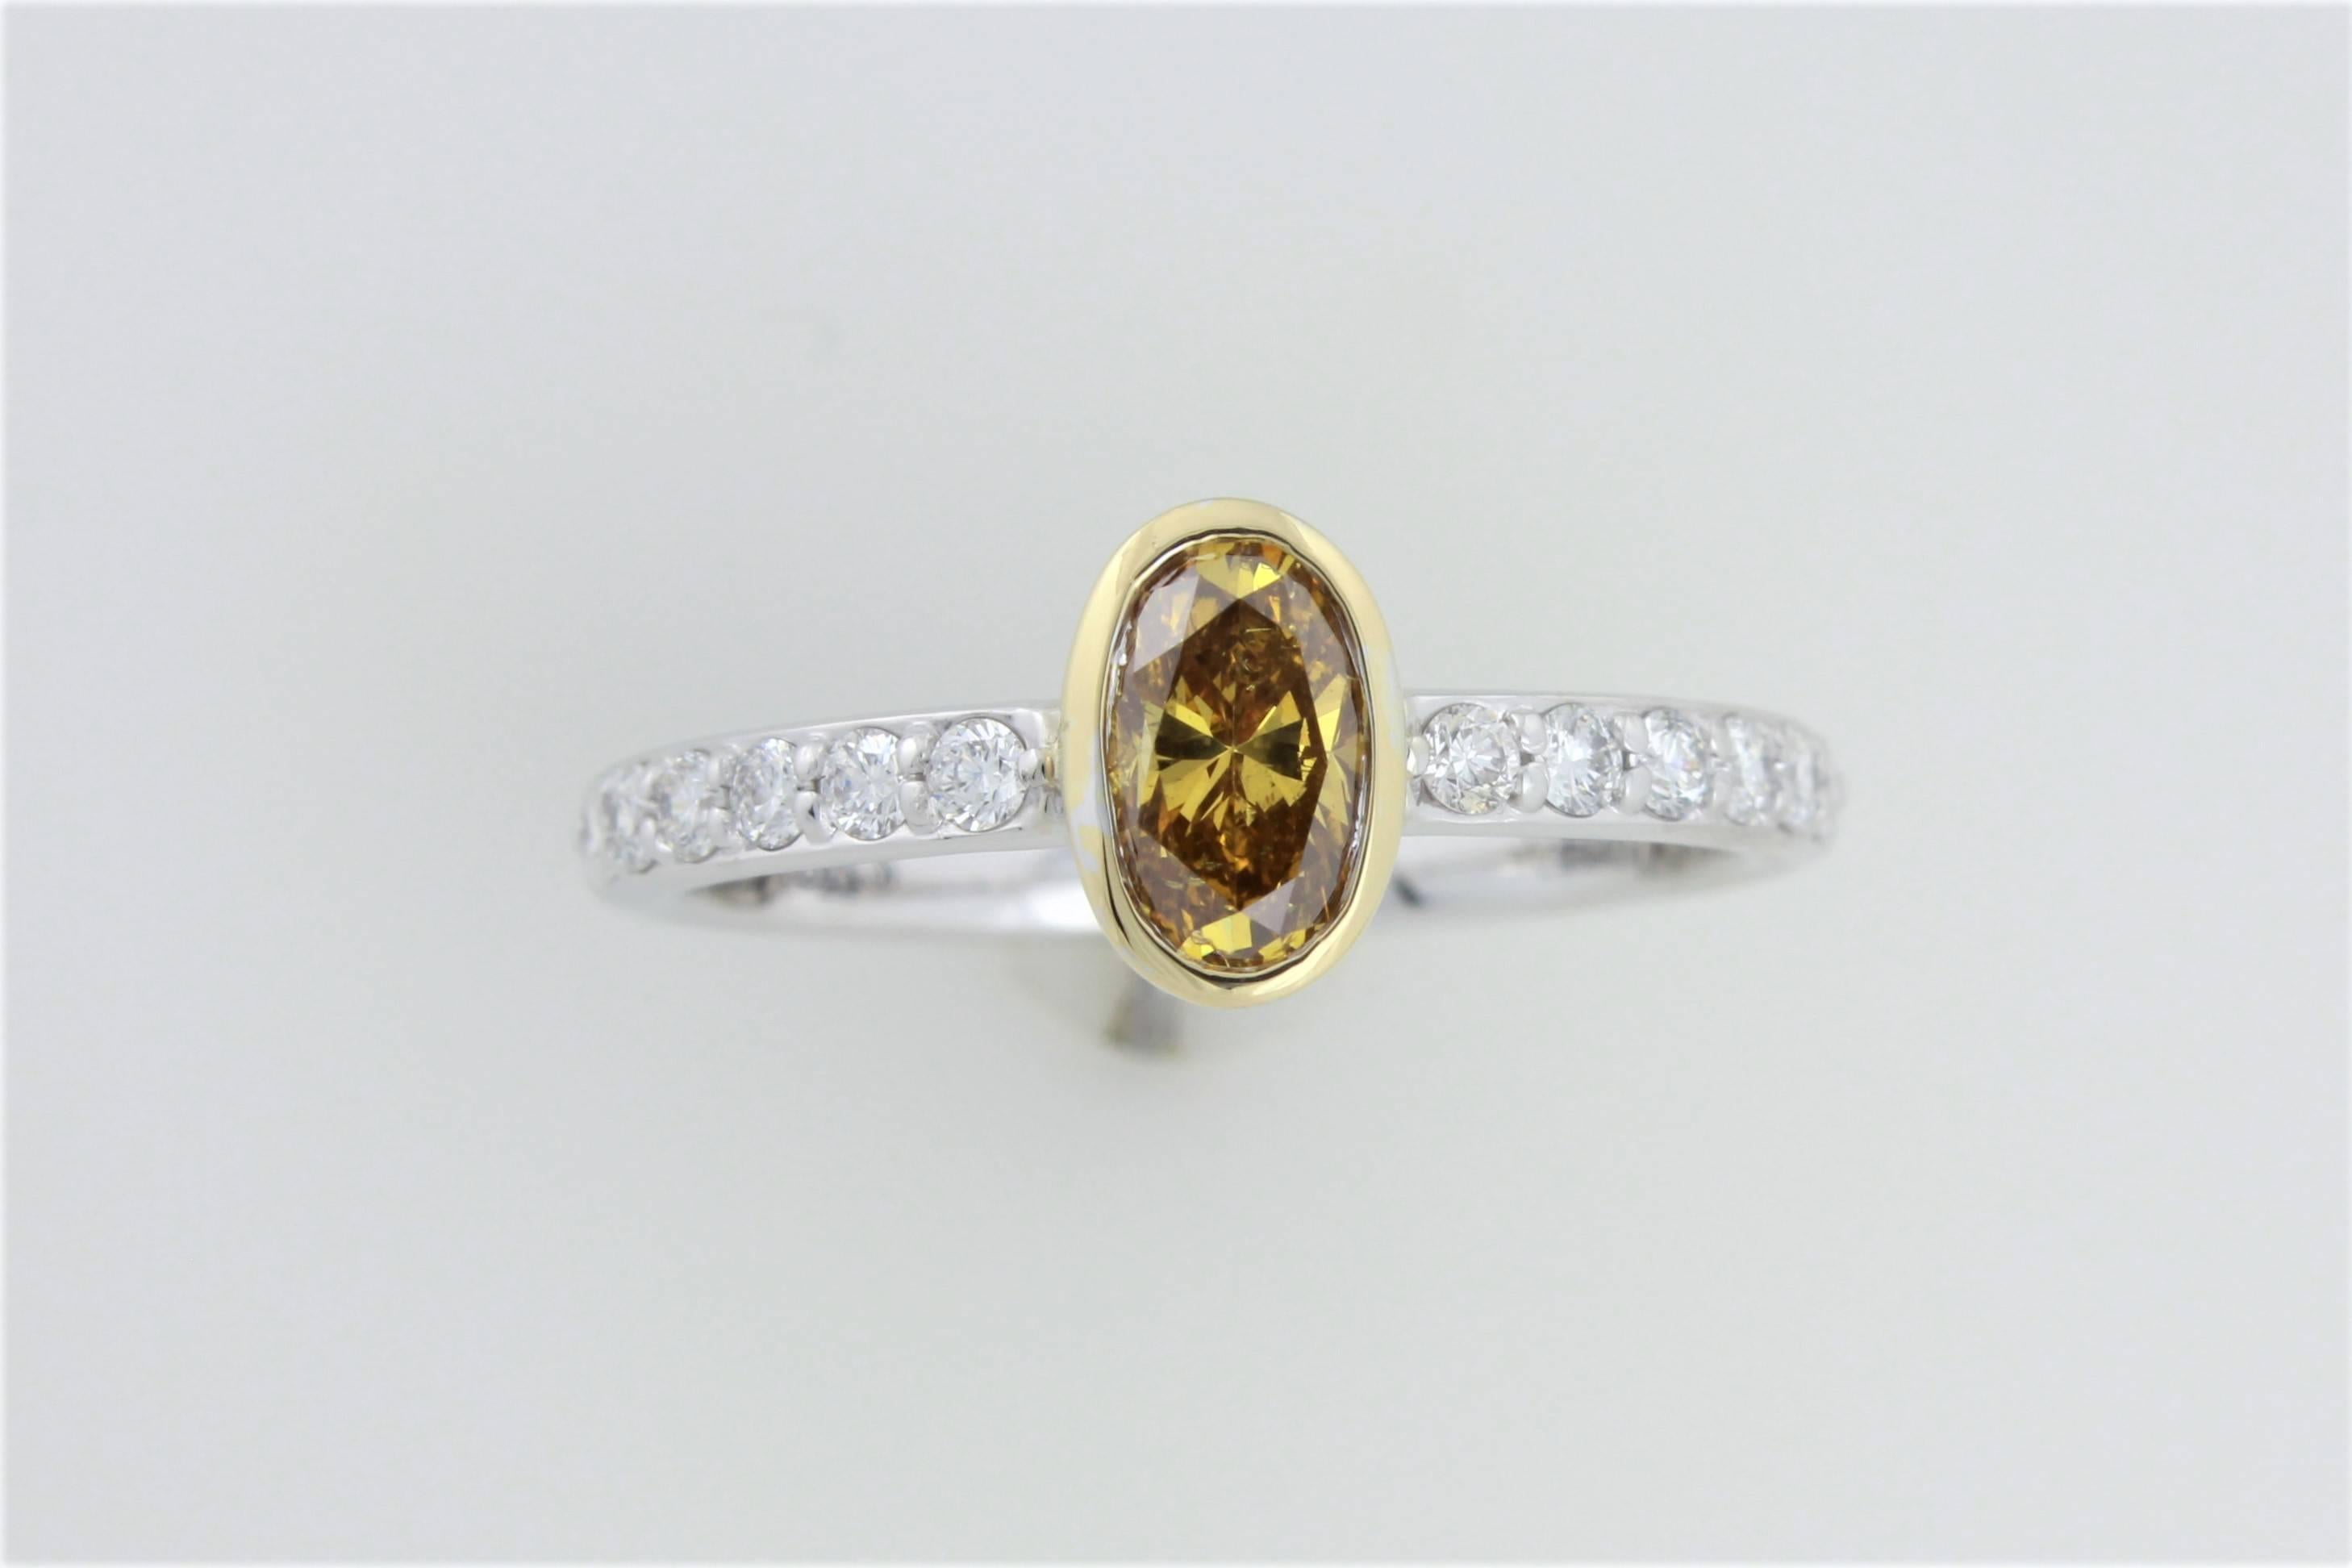 Presenting a stunning .56 carat, eye clean natural color Fancy Deep Orange Yellow oval diamond set in a classic 18 karat bezel in an 18 karat white gold and diamond ring!  The GIA lab report number is 15076980.  The white diamonds total .22 carats